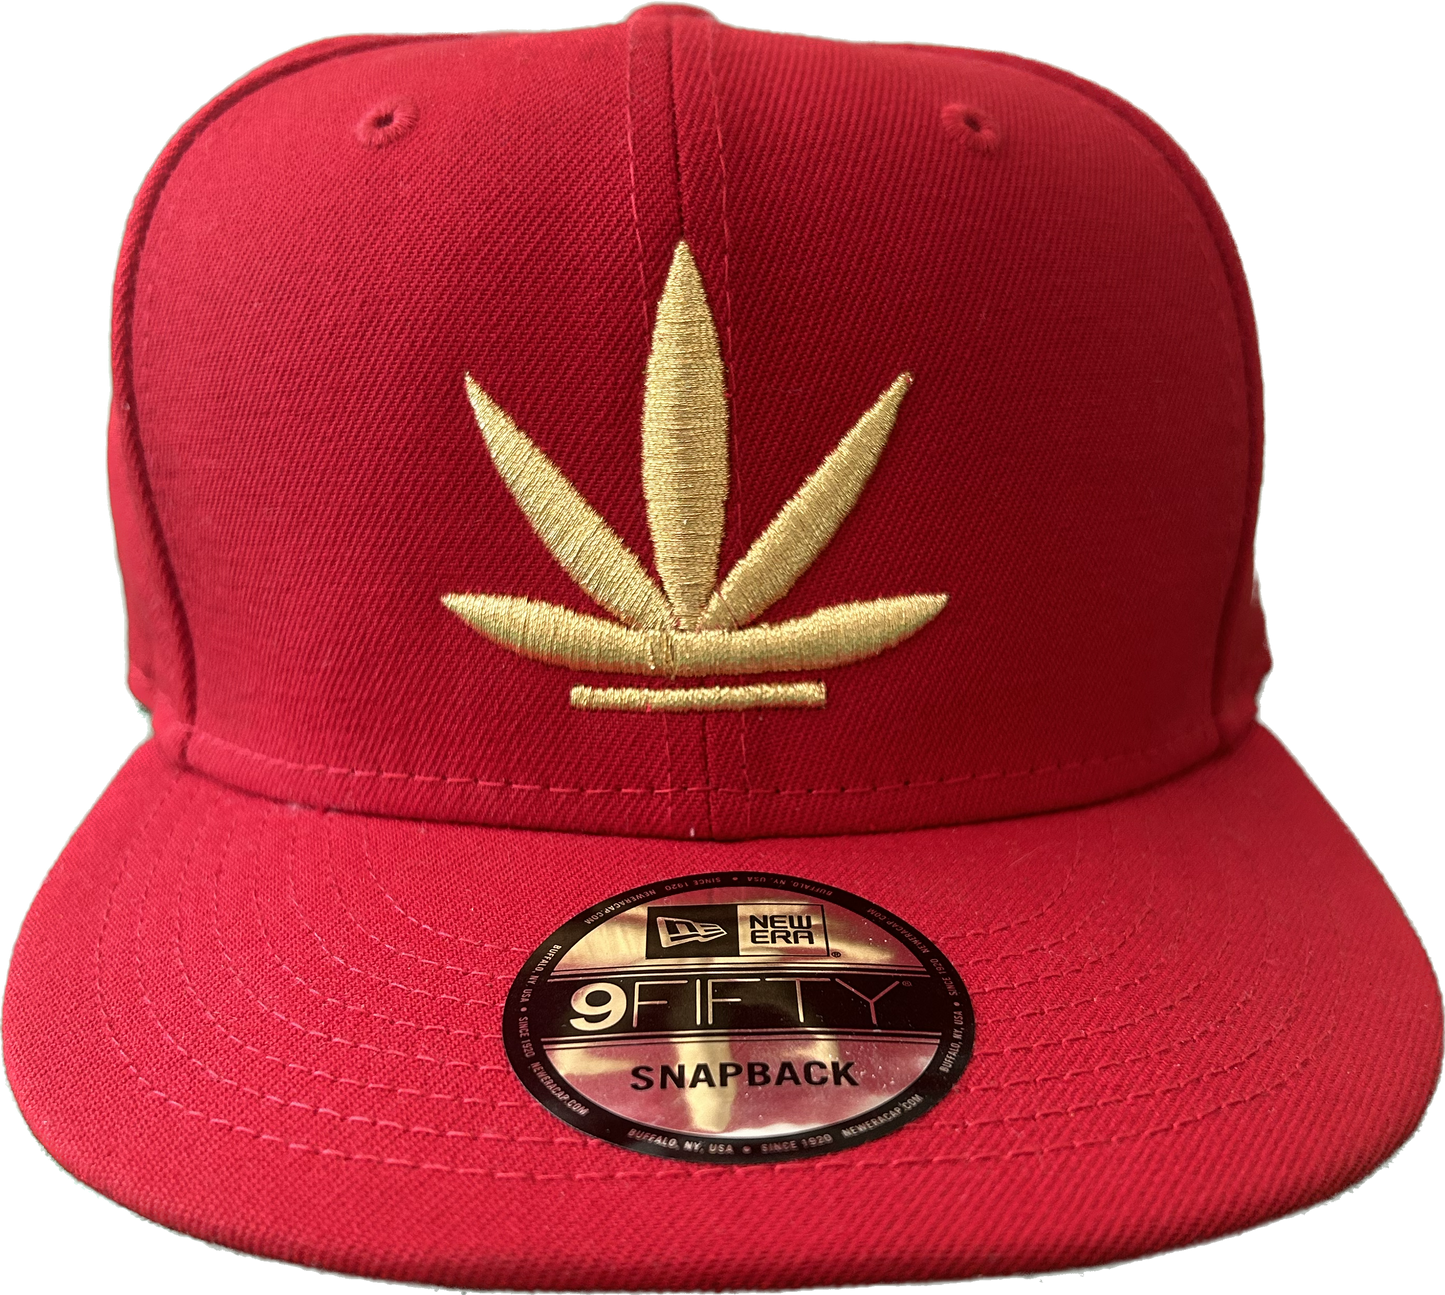 “The Chronn” Level Red and Gold Snapback